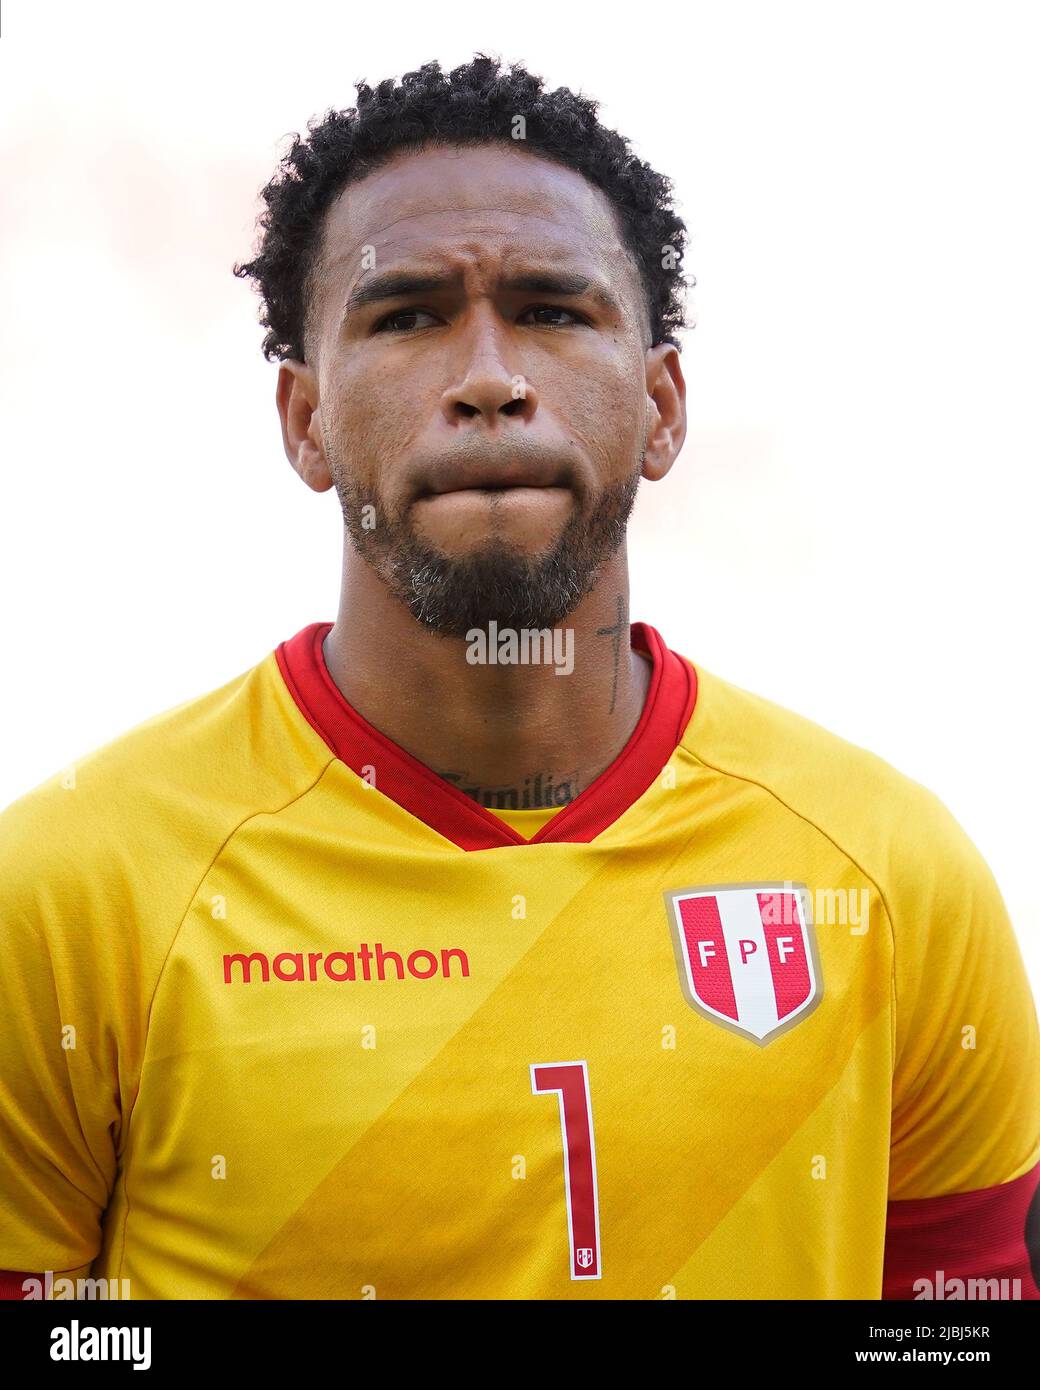 Pedro Gallese Of Peru During The Friendly Match Between Peru And New Zealand Played At Rcde Stadium On June 5 22 In Barcelona Spain Photo By Bagu Blanco Pressinphoto Stock Photo Alamy